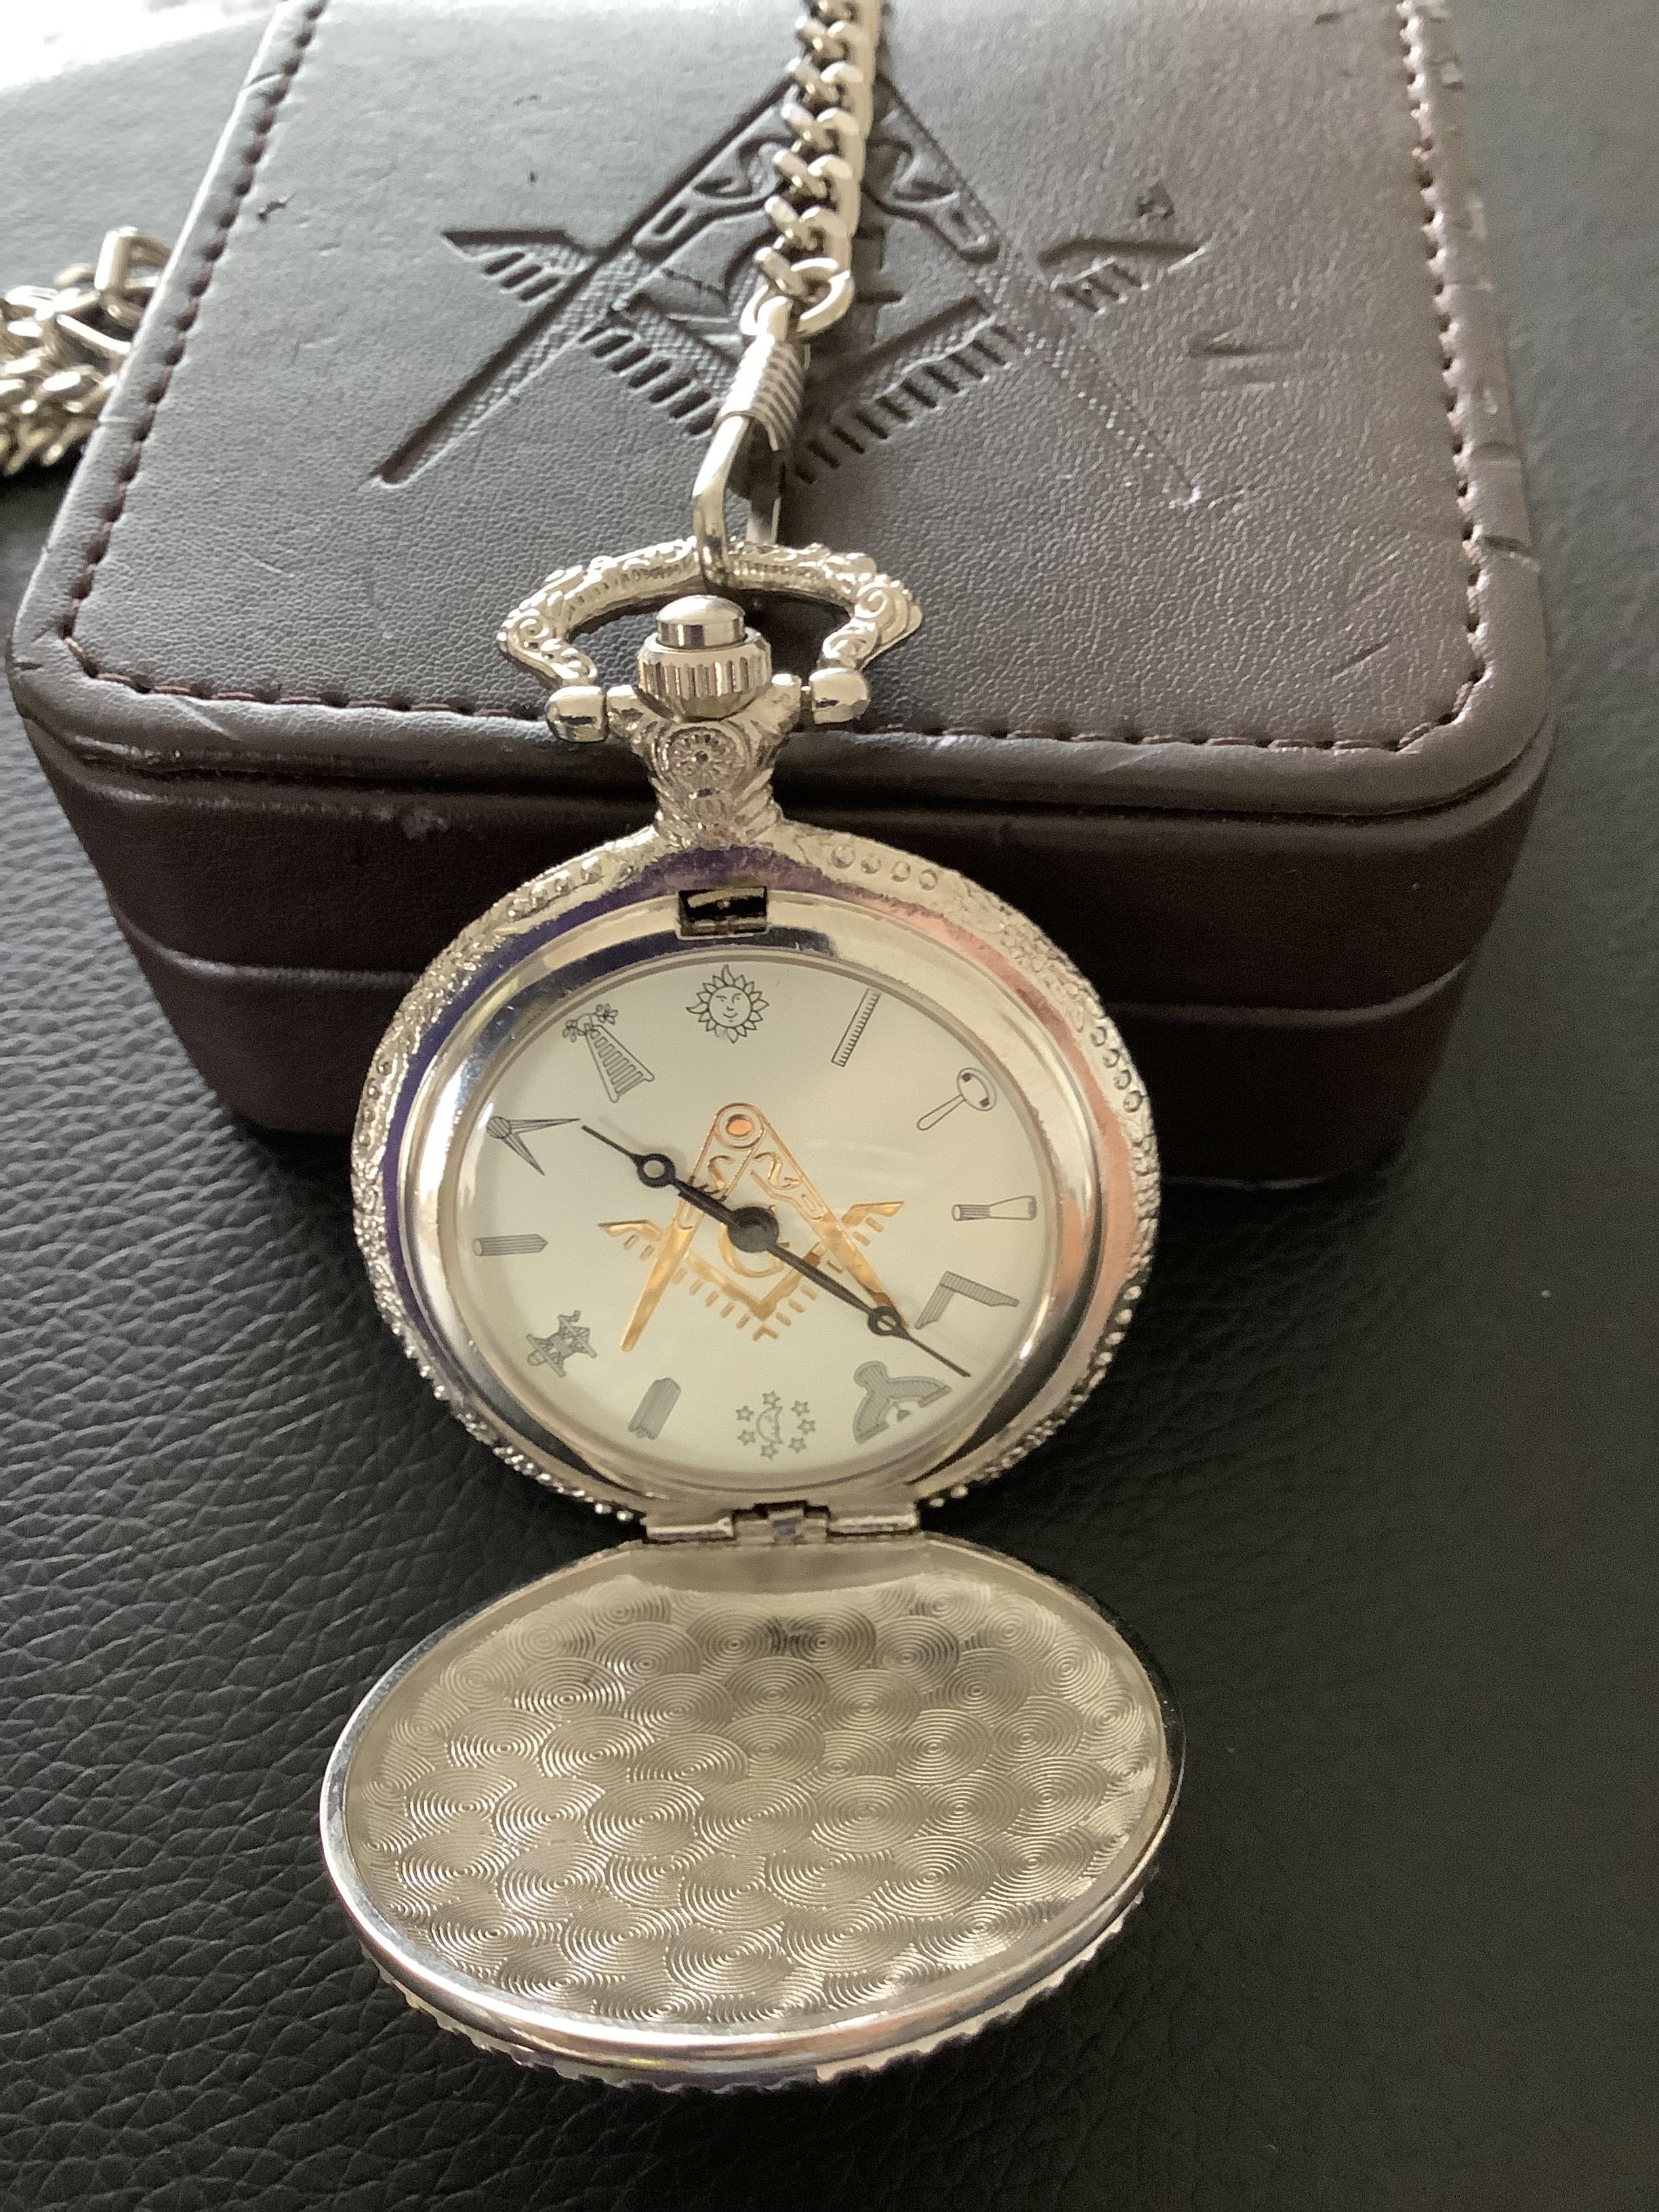 As New' Masonic Style Pocket Watch with decorative Chain (GS 180) - Image 2 of 5